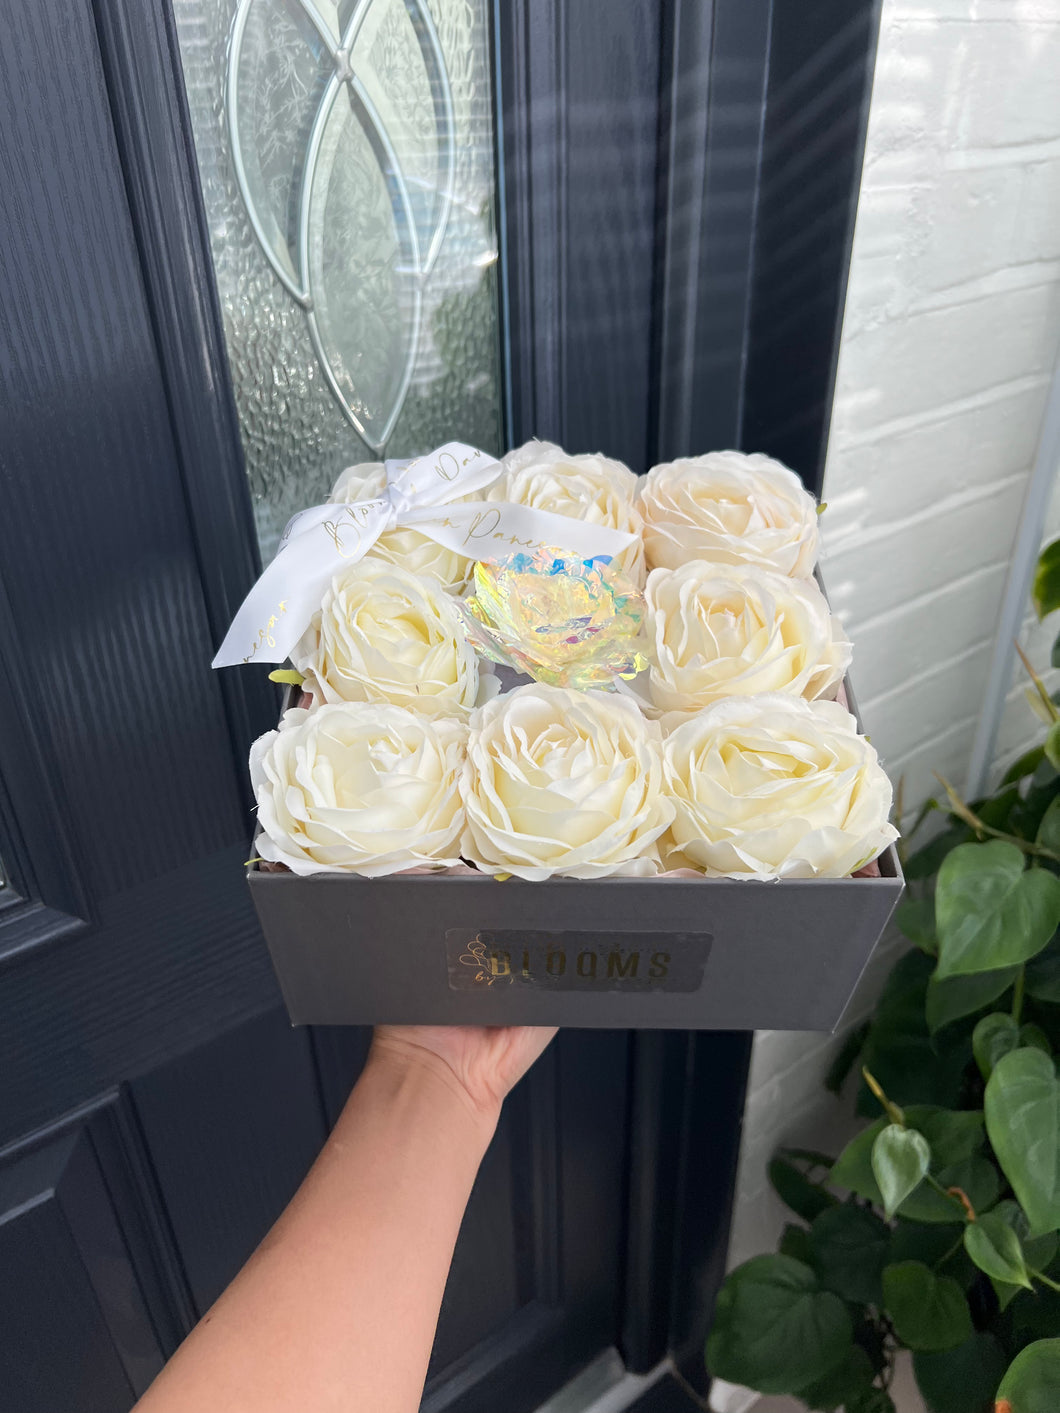 Square grey box with white roses